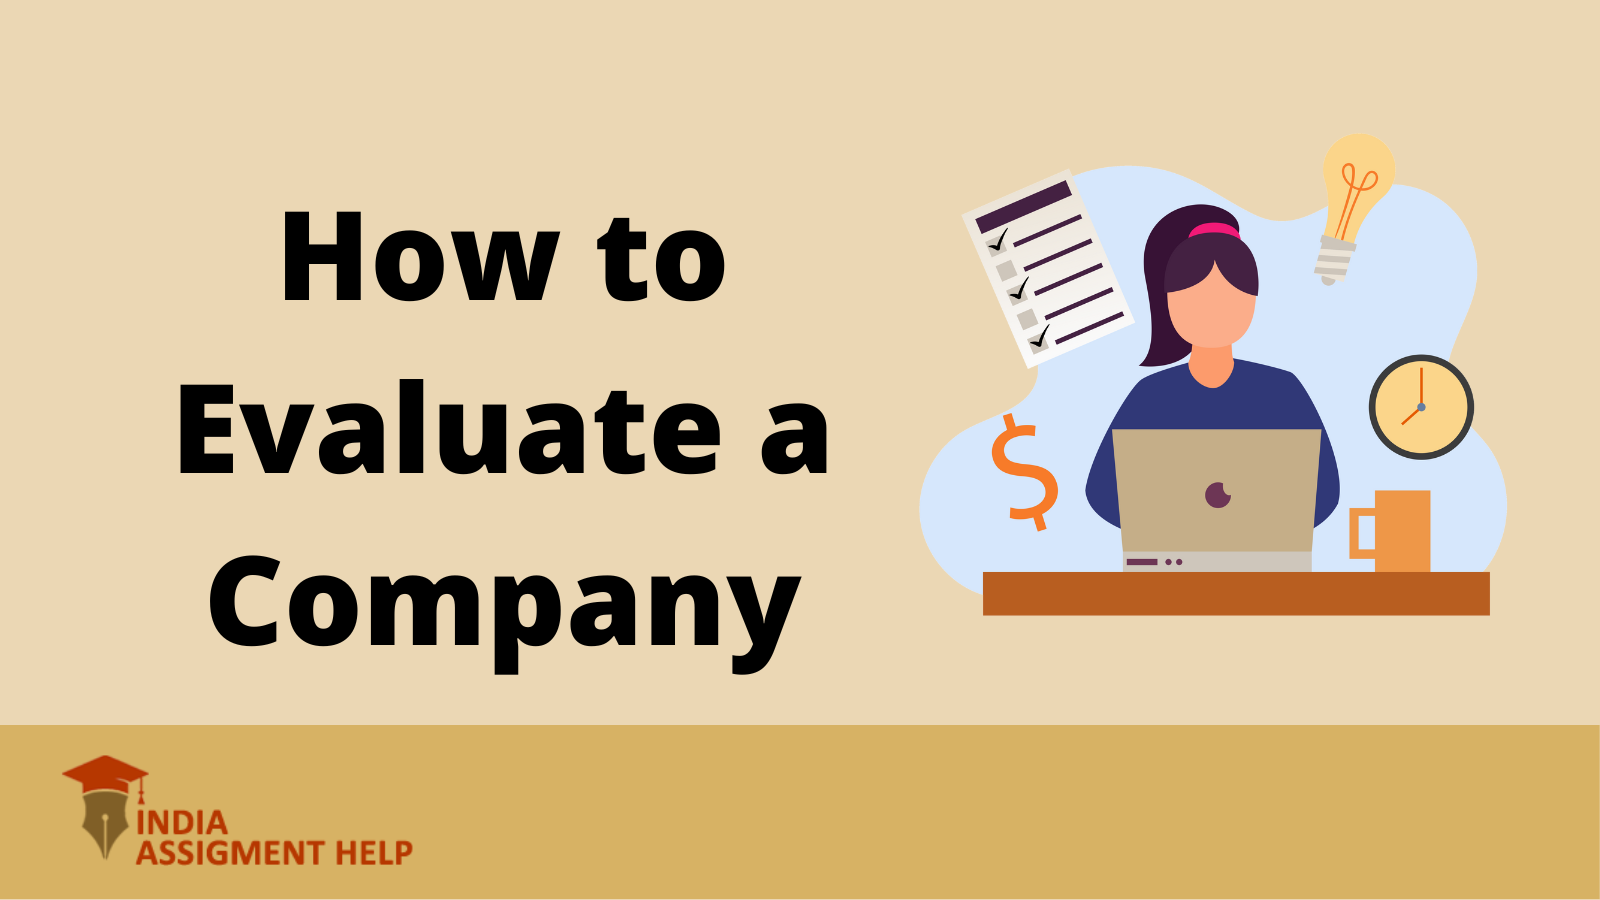 How to Evaluate a Company